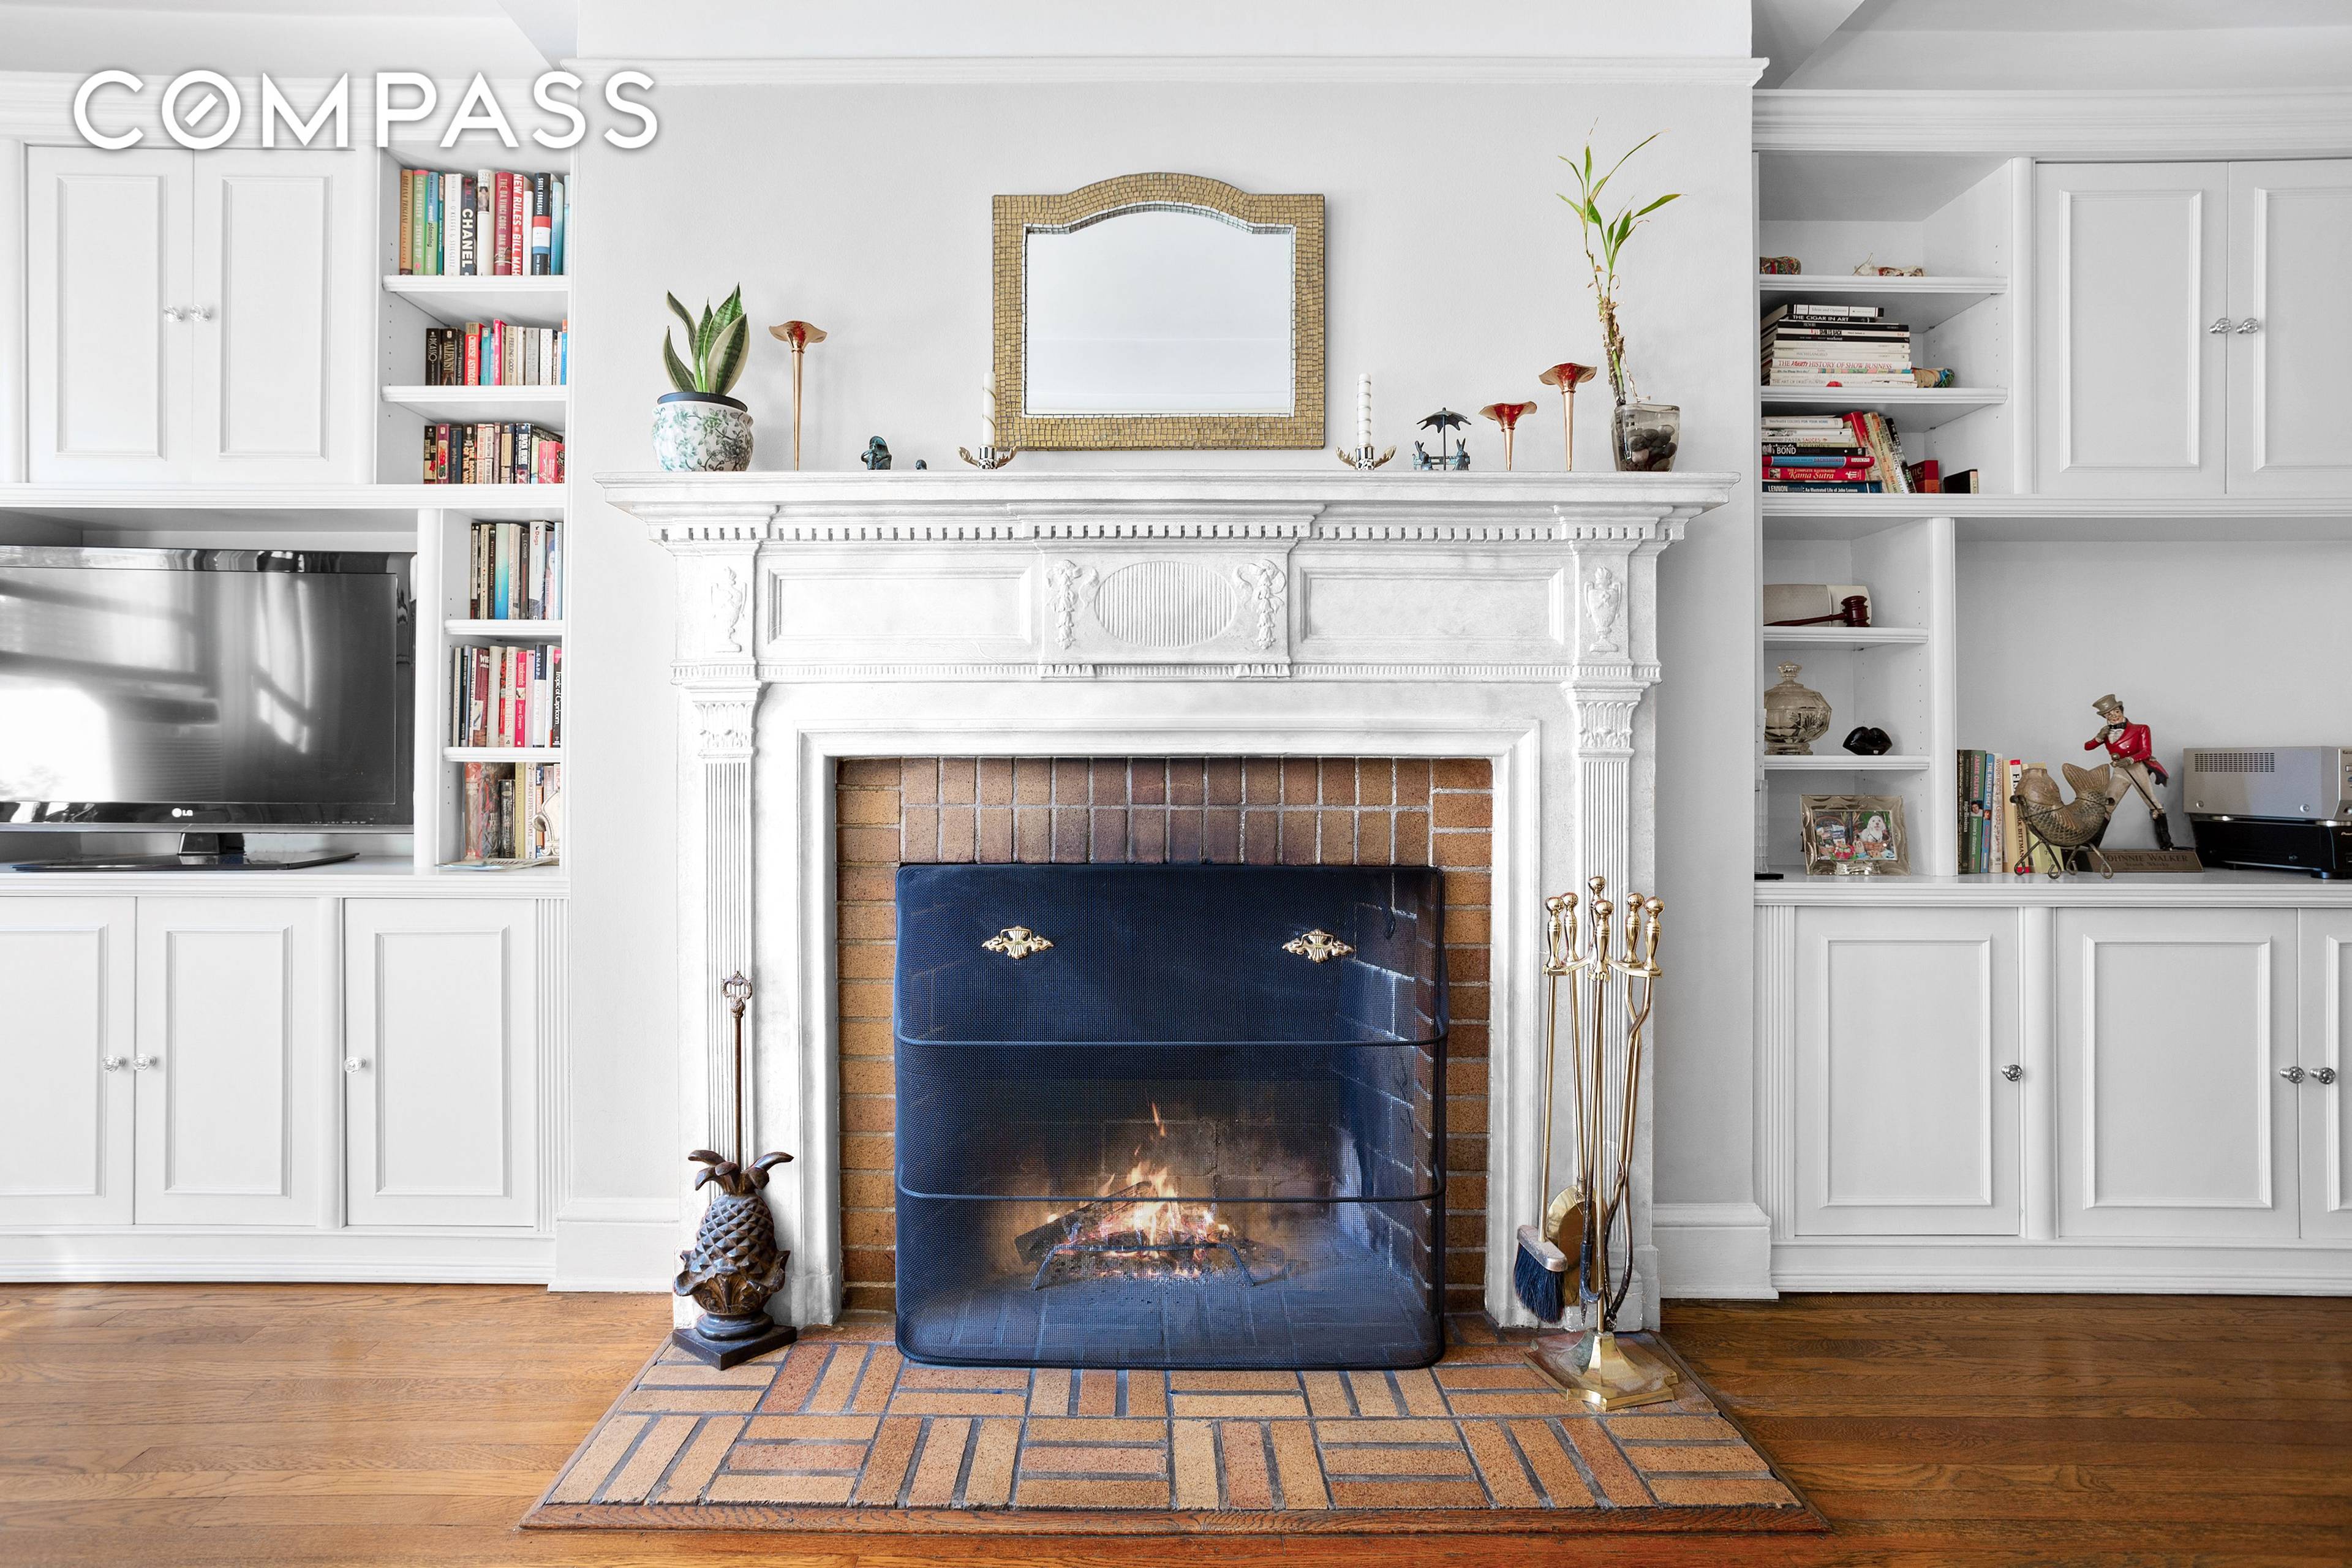 This is a uniquely sophisticated Upper East Side prewar find !